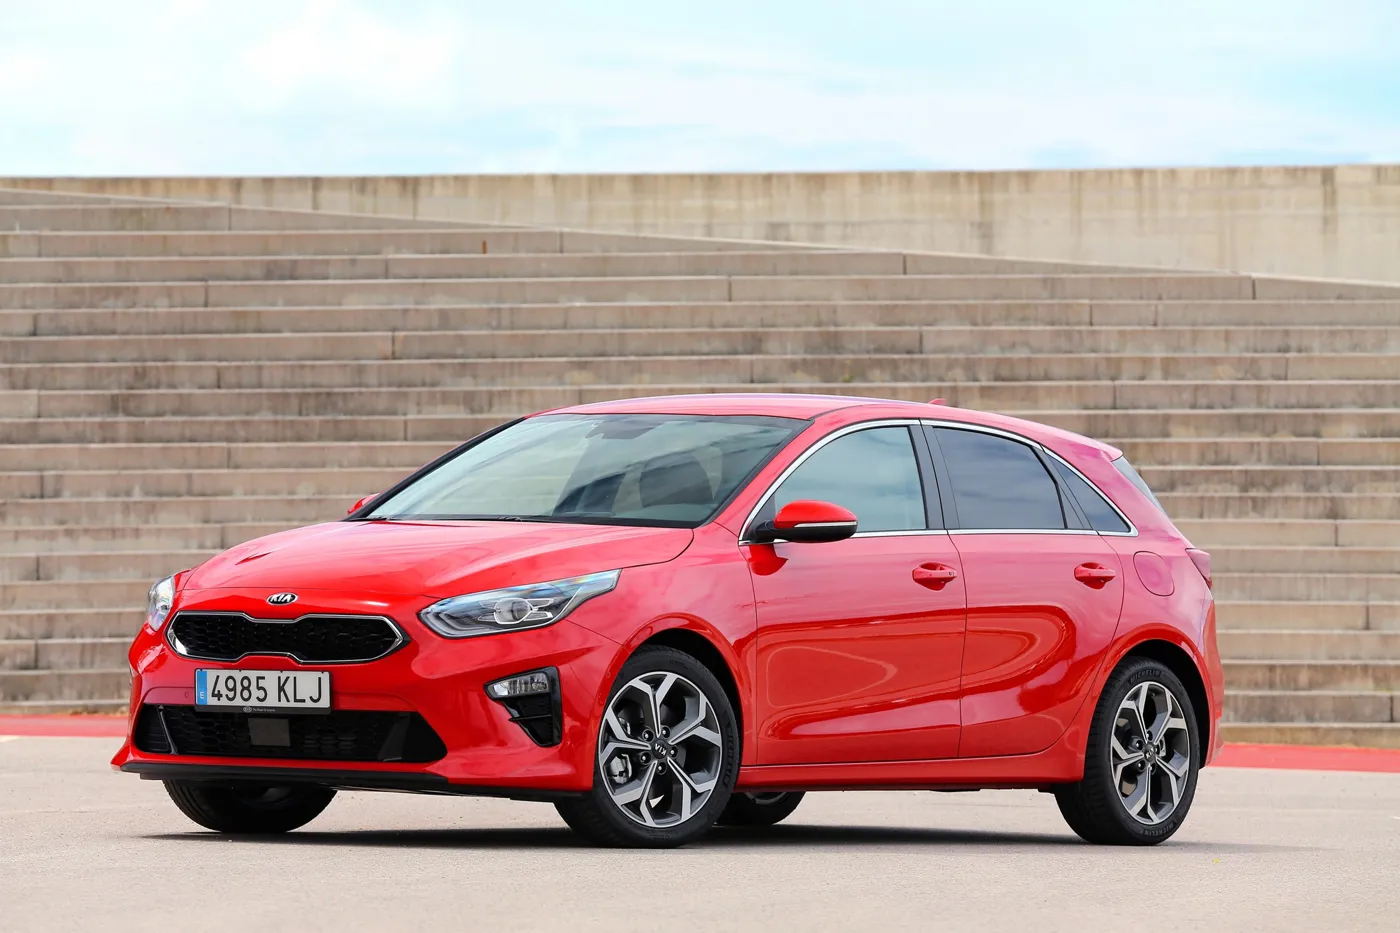 First Drive Review: Kia Ceed